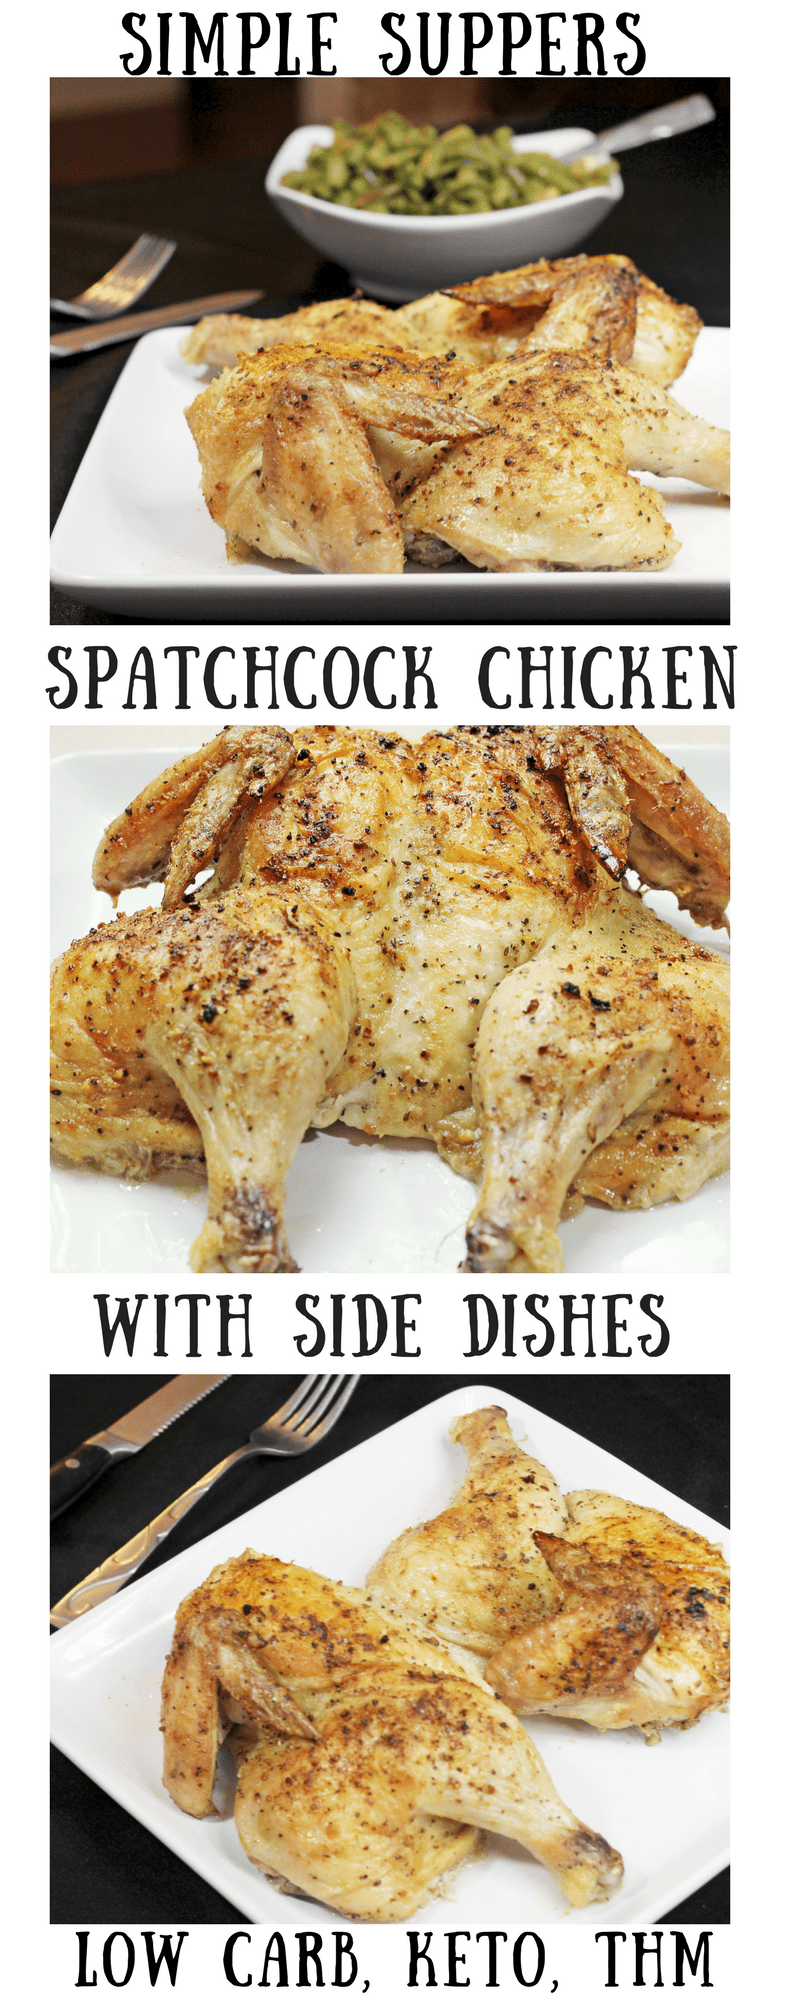 My Table of Three's Simple Suppers Series features an easy Spatchcock Chicken and Side Dishes that are family and budget friendly. 